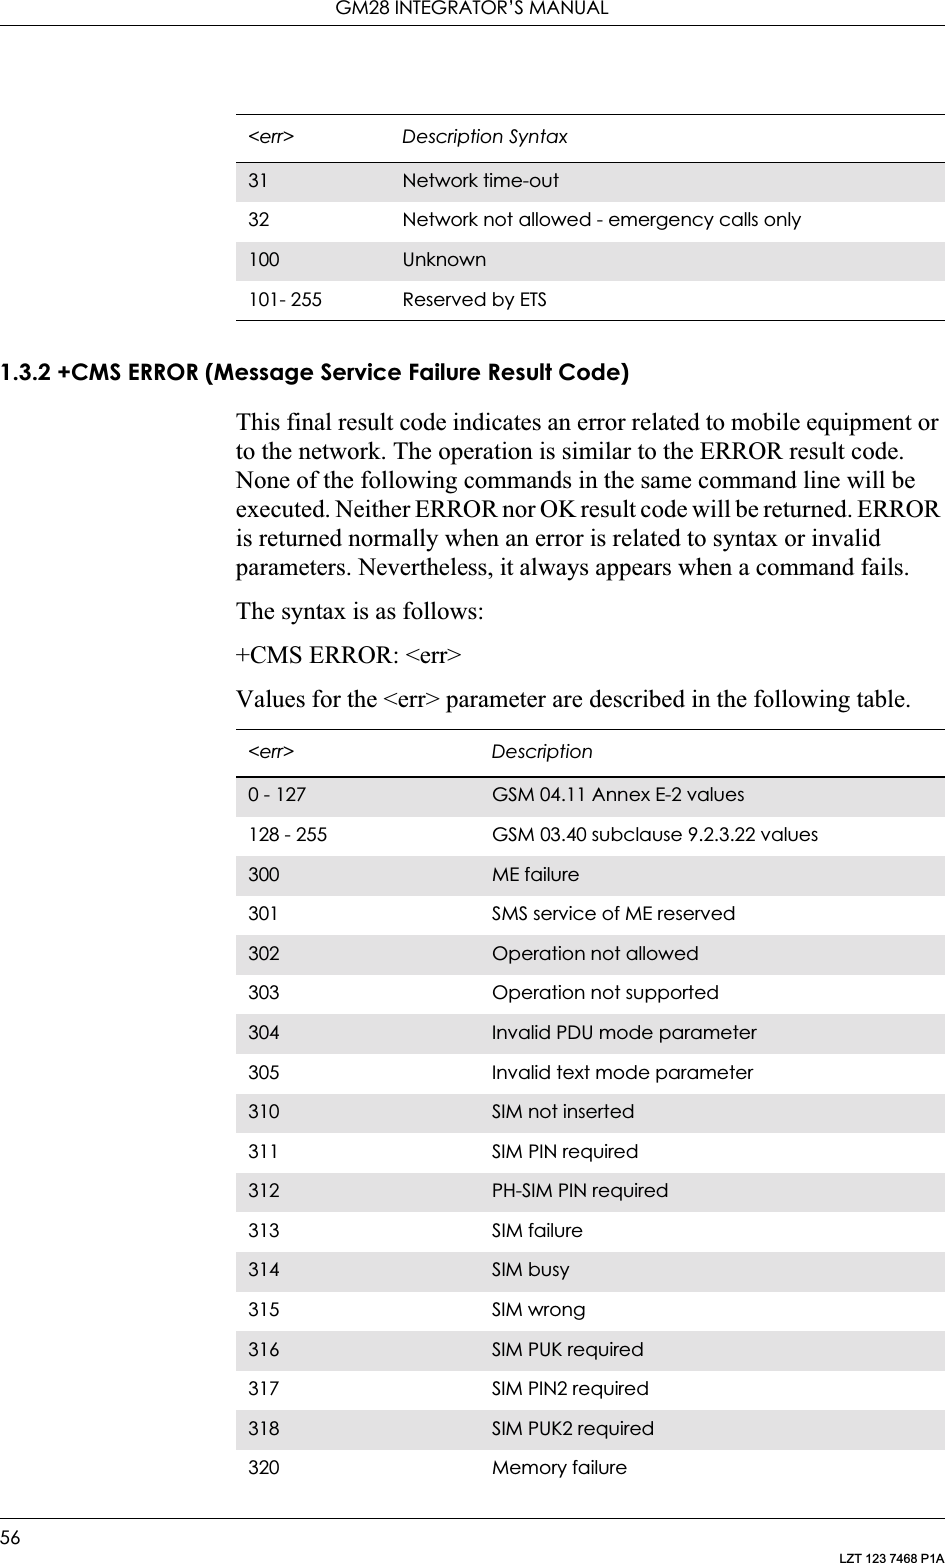 GM28 INTEGRATOR’S MANUAL56LZT 123 7468 P1A1.3.2 +CMS ERROR (Message Service Failure Result Code)This final result code indicates an error related to mobile equipment or to the network. The operation is similar to the ERROR result code. None of the following commands in the same command line will be executed. Neither ERROR nor OK result code will be returned. ERROR is returned normally when an error is related to syntax or invalid parameters. Nevertheless, it always appears when a command fails.The syntax is as follows:+CMS ERROR: &lt;err&gt;Values for the &lt;err&gt; parameter are described in the following table.31 Network time-out32 Network not allowed - emergency calls only100 Unknown101- 255 Reserved by ETS&lt;err&gt; Description Syntax&lt;err&gt; Description0 - 127 GSM 04.11 Annex E-2 values128 - 255 GSM 03.40 subclause 9.2.3.22 values300 ME failure301 SMS service of ME reserved302 Operation not allowed303 Operation not supported304 Invalid PDU mode parameter305 Invalid text mode parameter310 SIM not inserted311 SIM PIN required312 PH-SIM PIN required313 SIM failure314 SIM busy315 SIM wrong316 SIM PUK required317 SIM PIN2 required318 SIM PUK2 required320 Memory failure